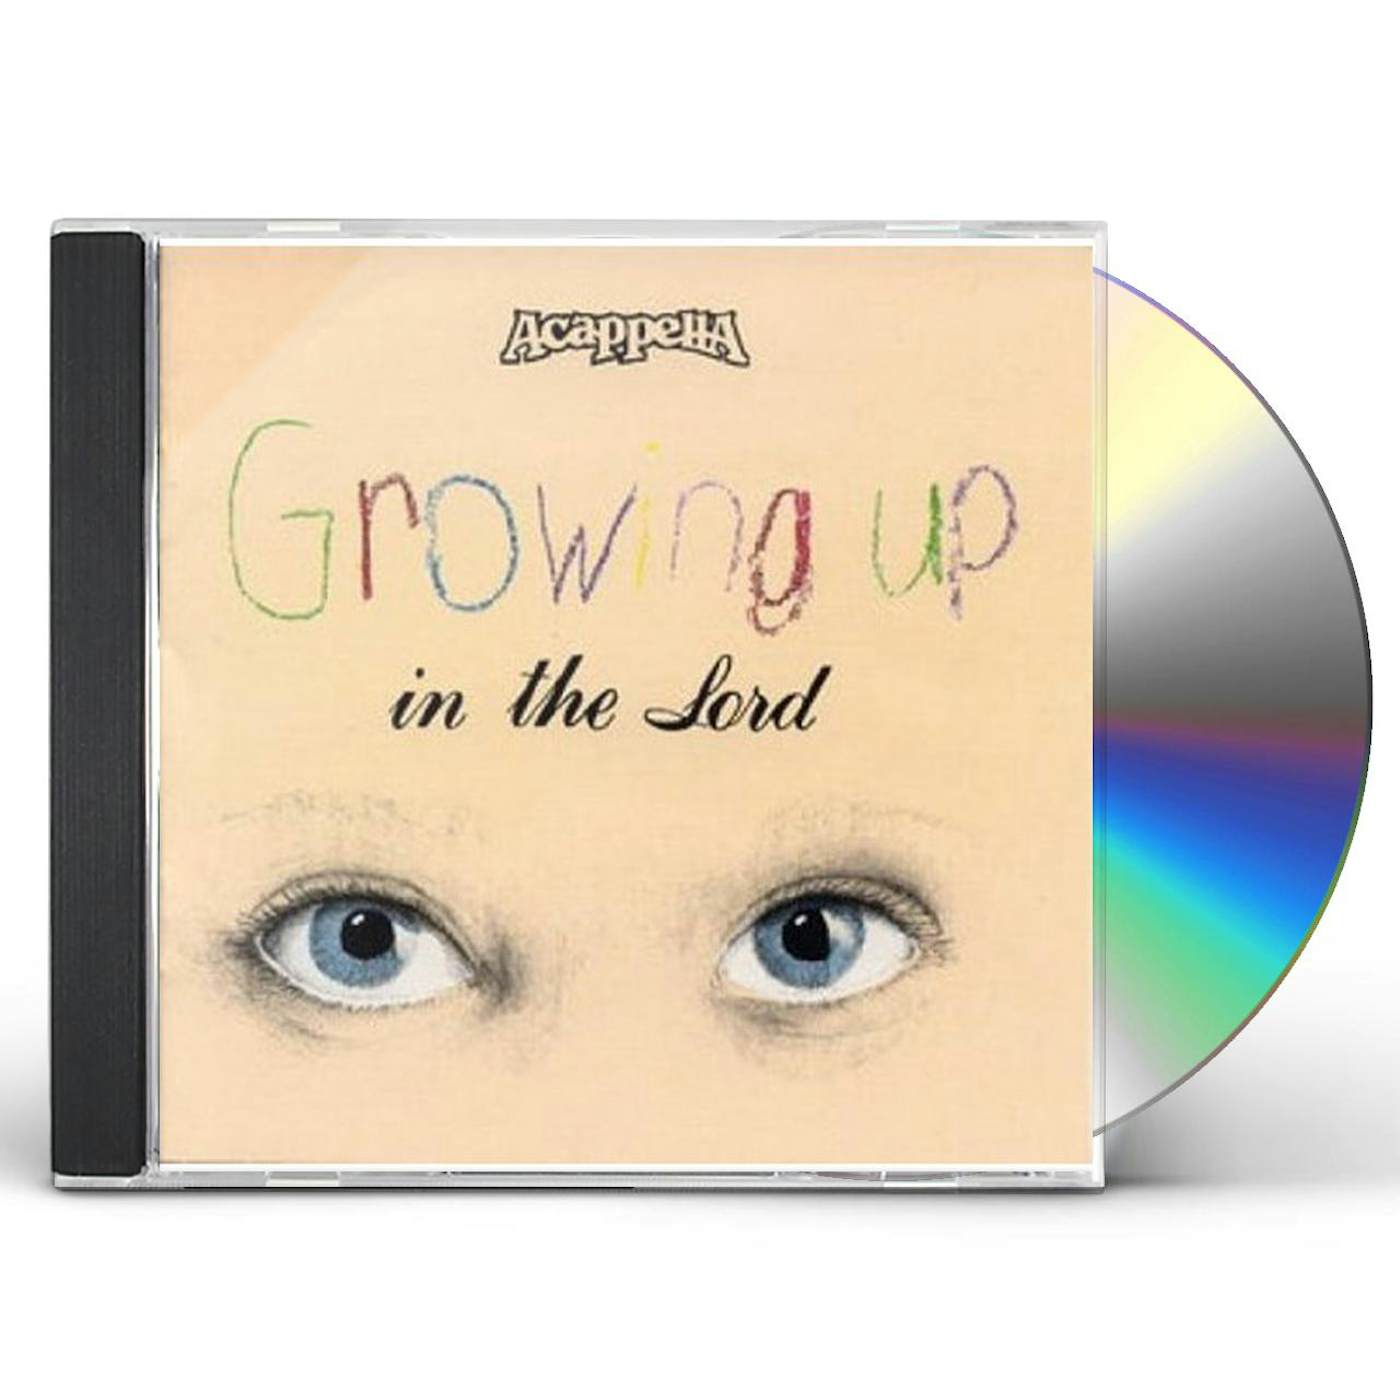 Acappella GROWING UP IN THE LORD CD